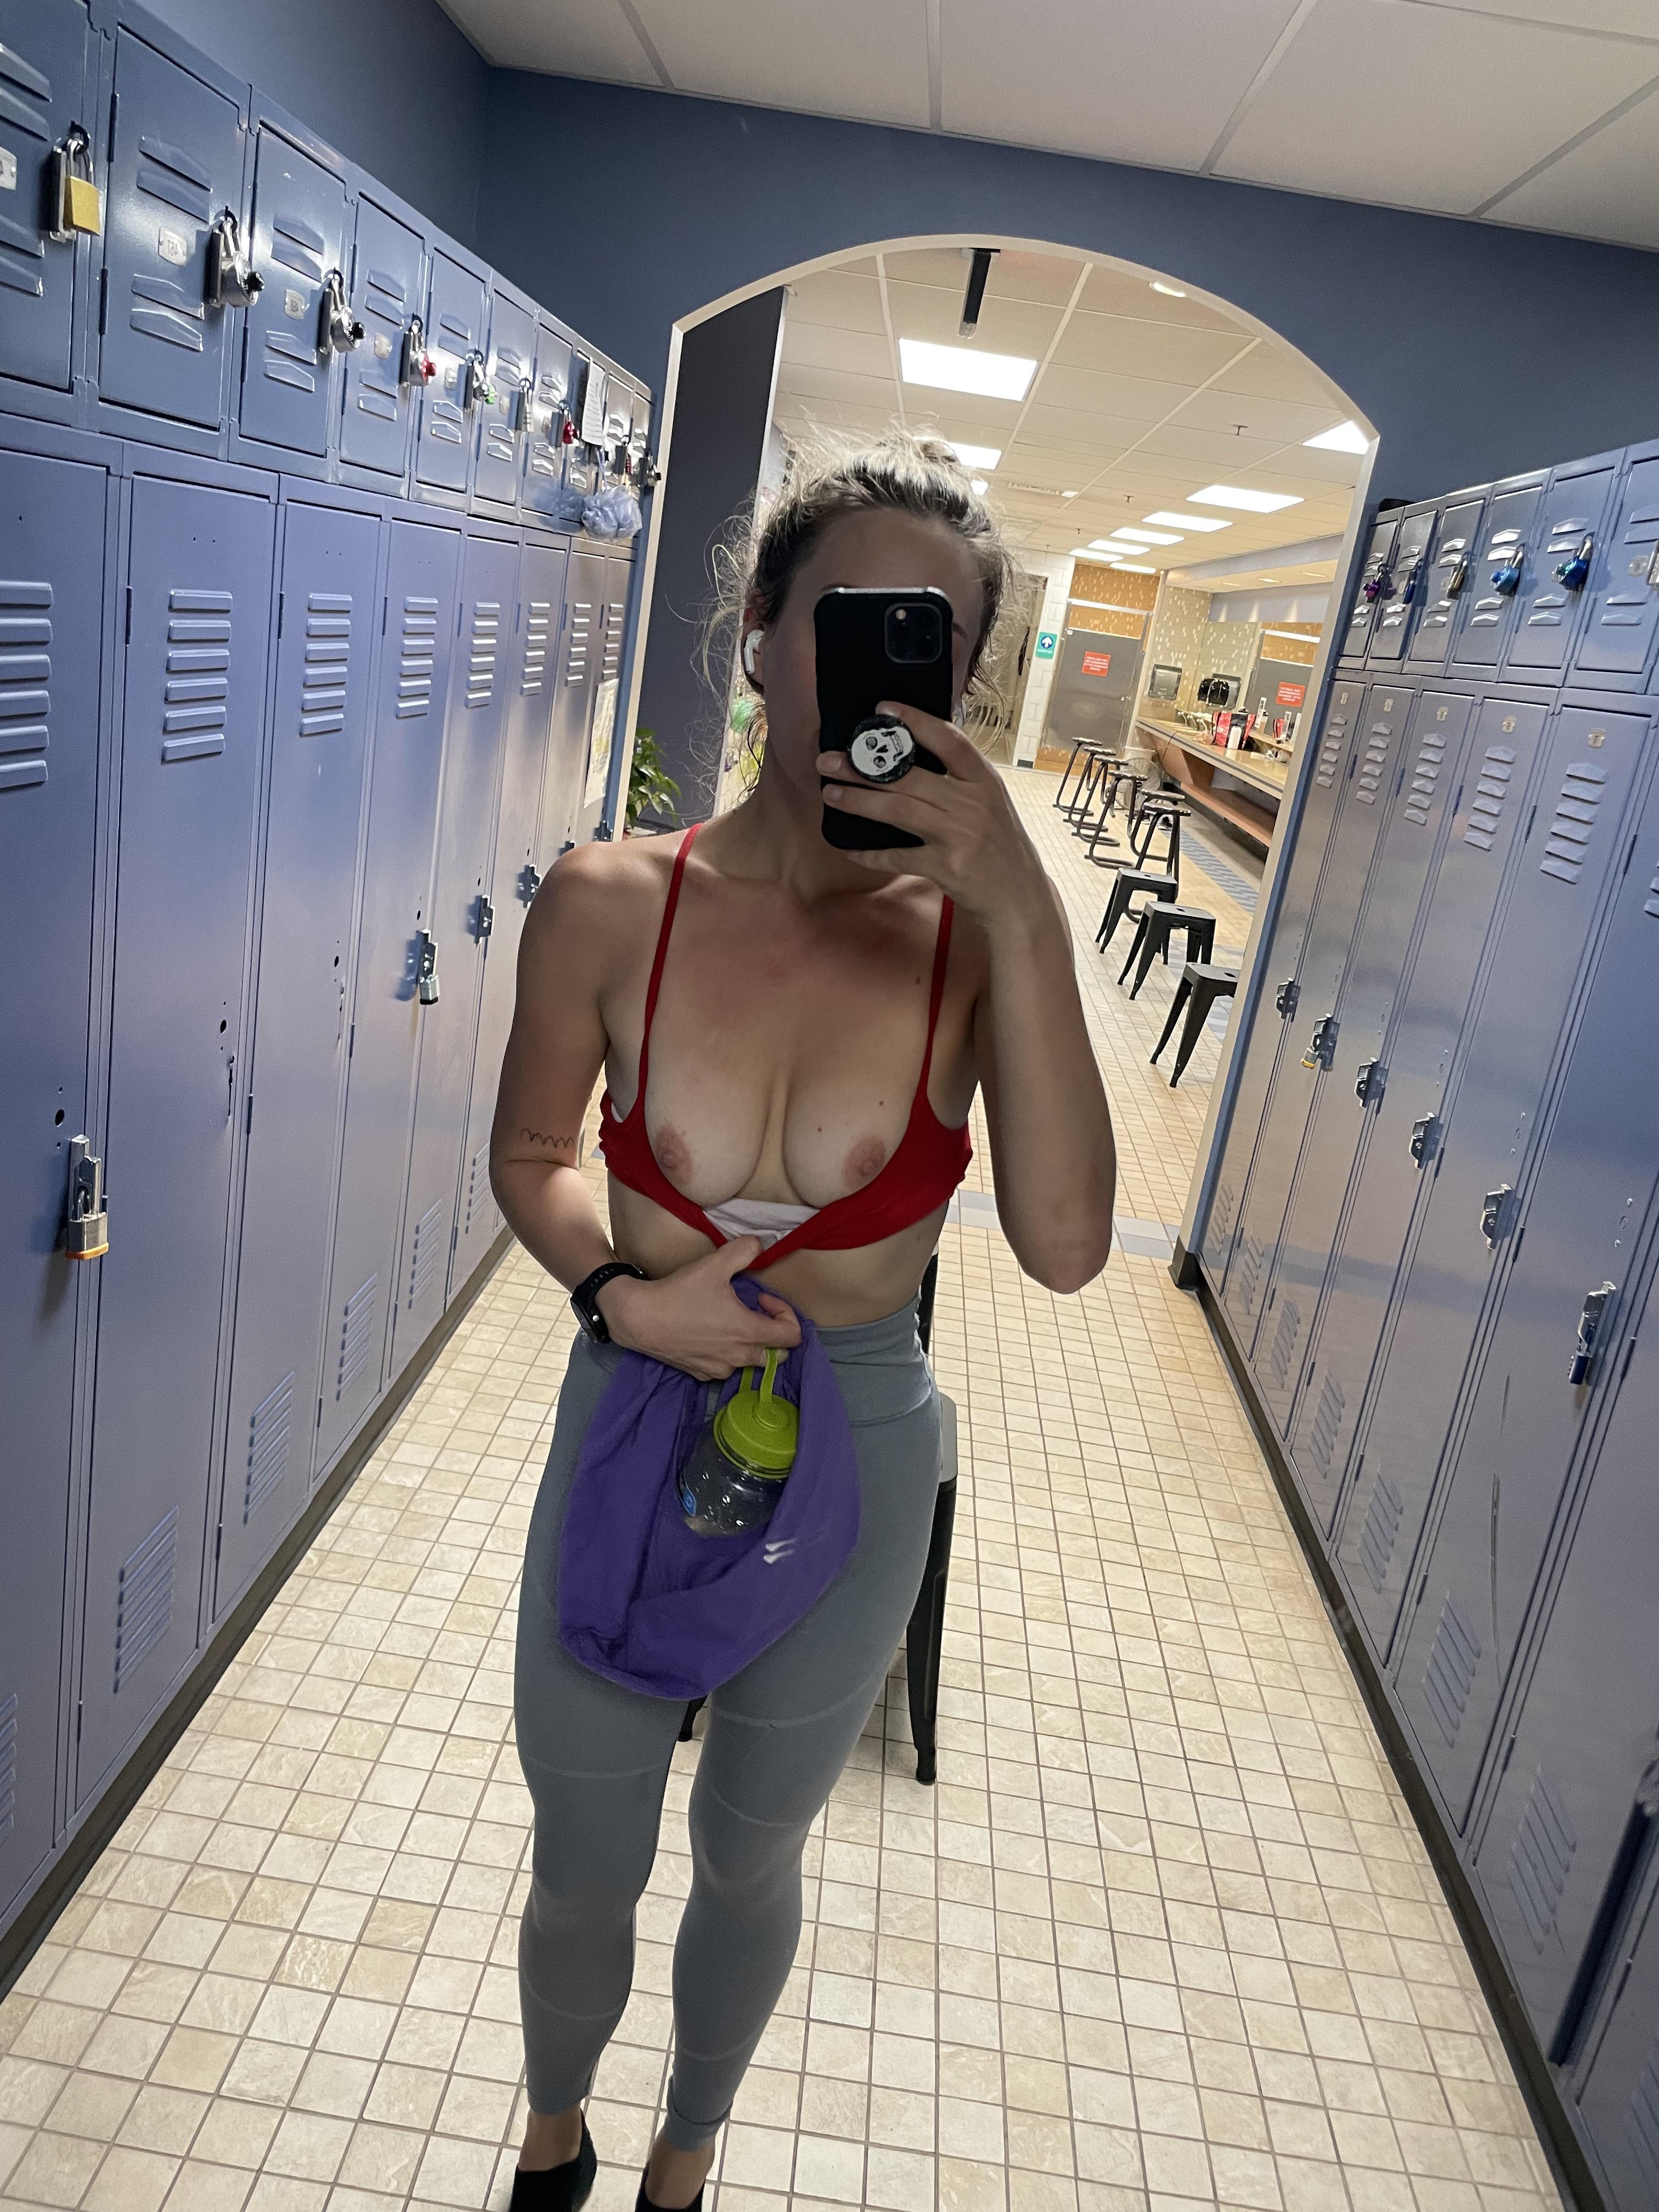 Shhh dont tell the other girls in the locker room how horny I am pic